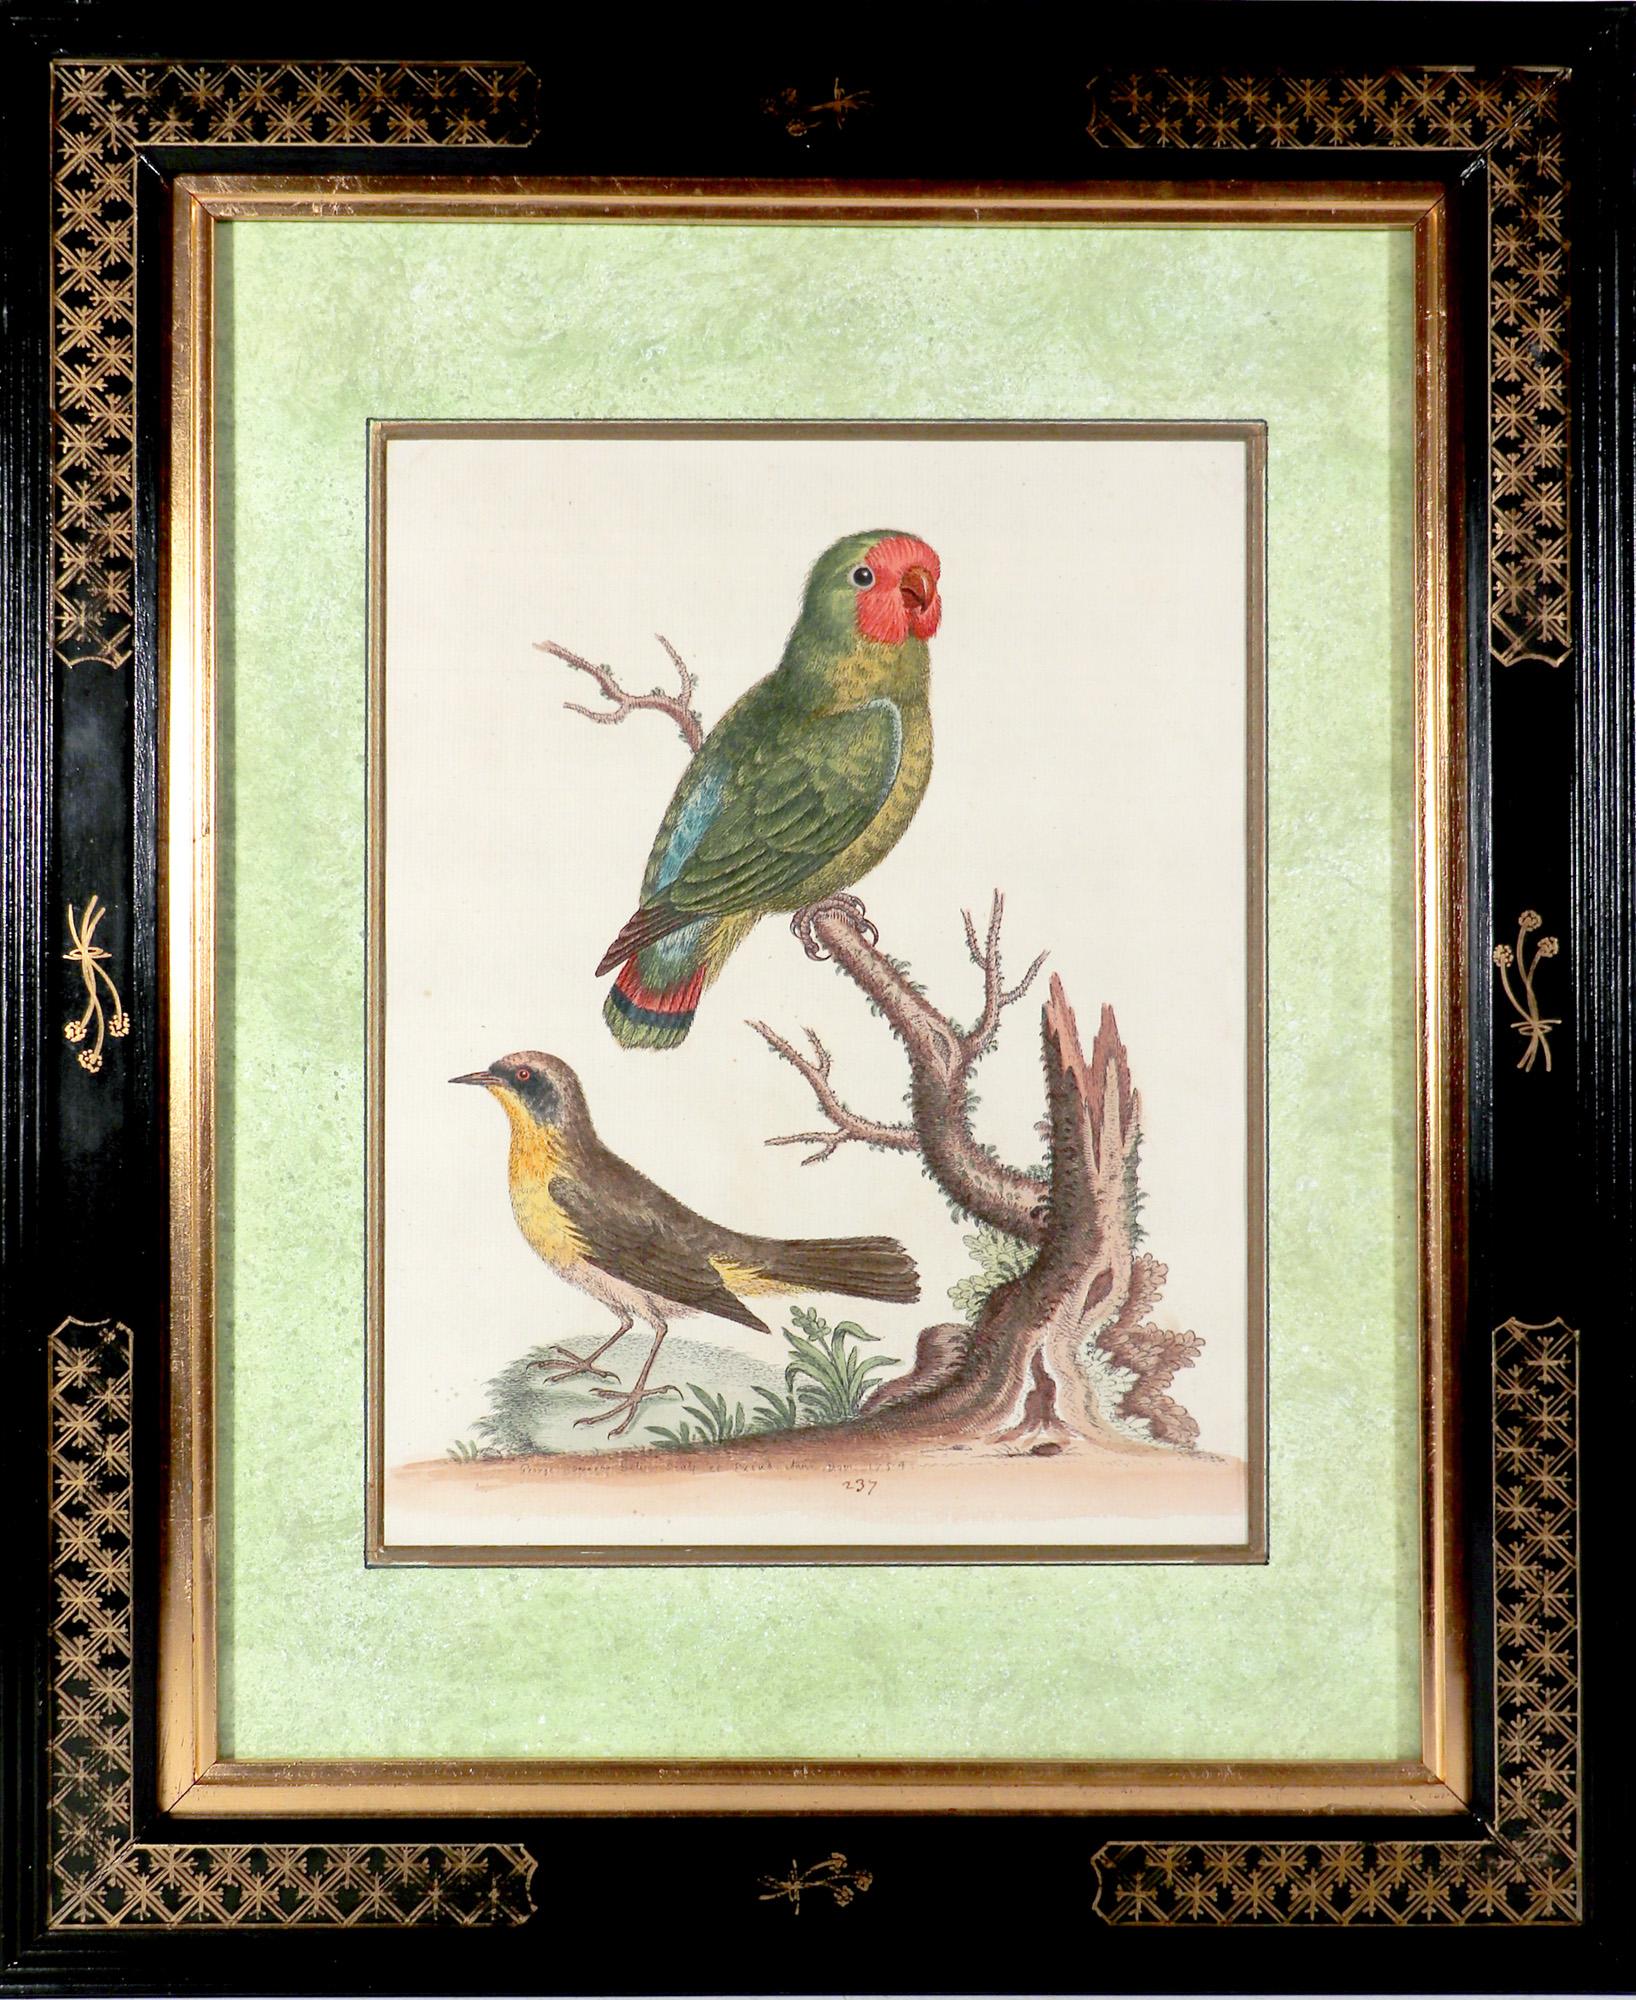 George Edwards Set of Twelve Parrot Engravings with chinoiserie Frames,
Natural History of Birds,
Engraved by Georg Dionysius Ehret,
Mid-18th century,

A fine set of twelve George Edwards Engravings of parrots within black chinoiserie frames.